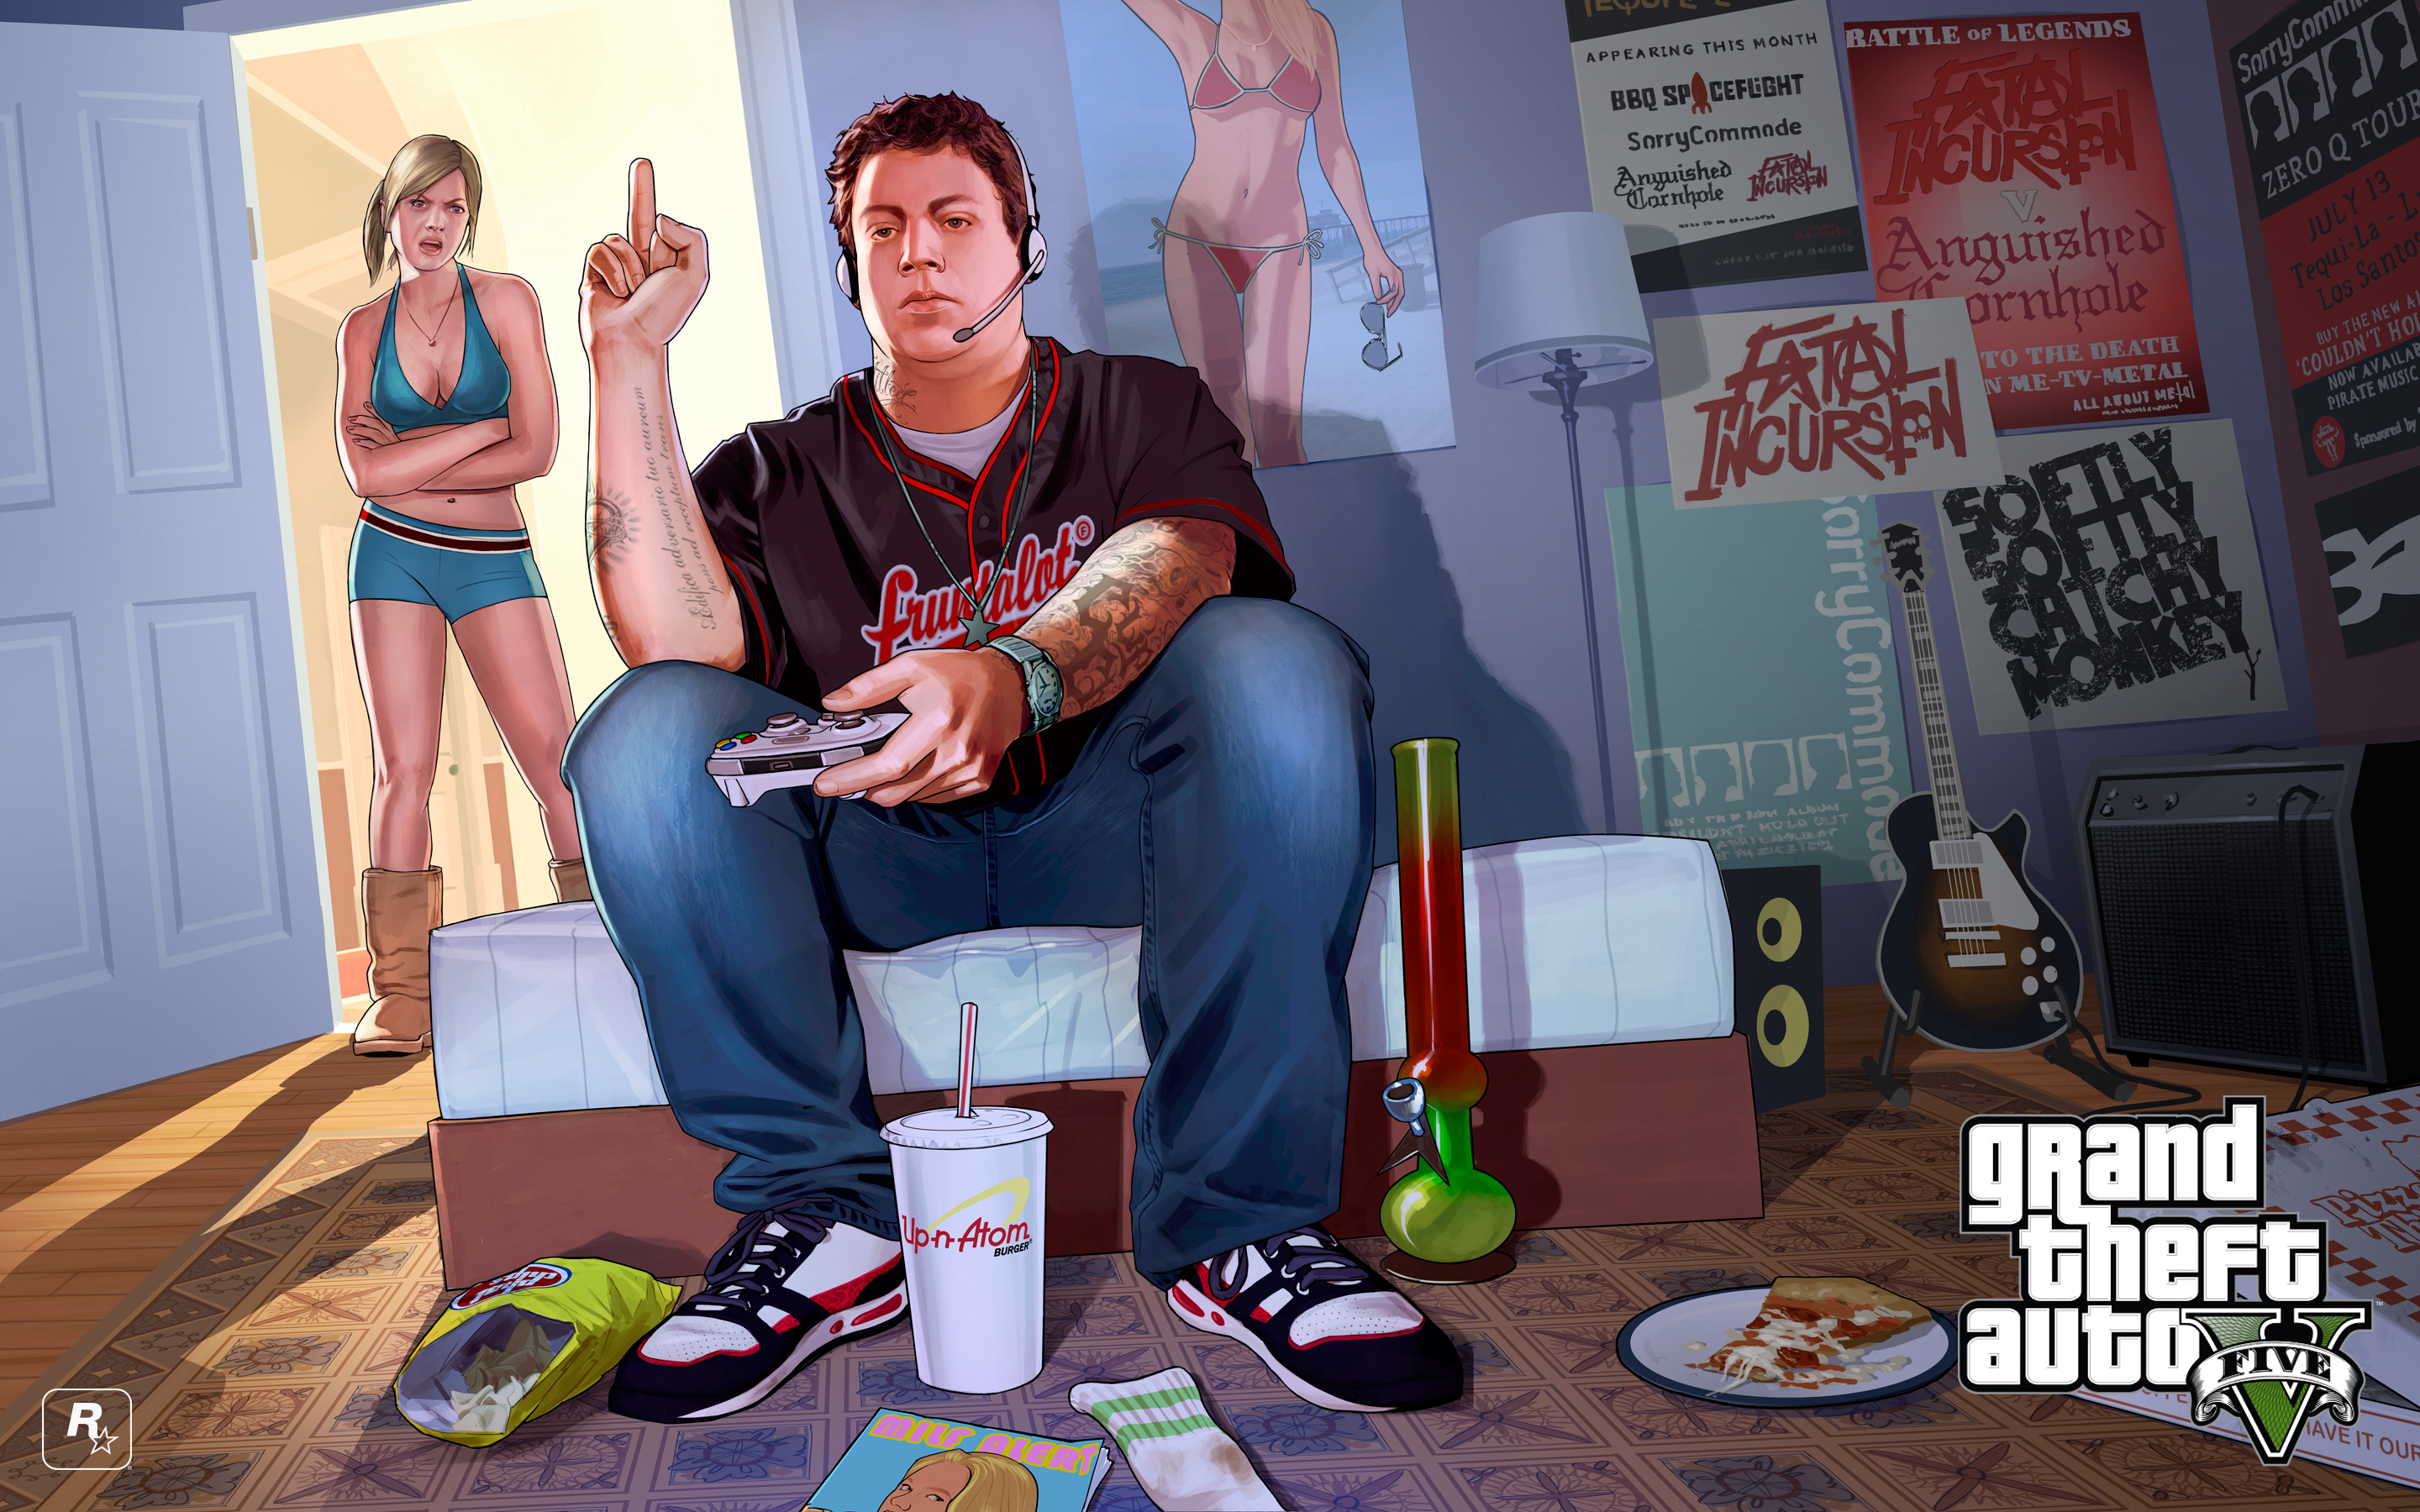 video game, grand theft auto v, blonde, boots, brown hair, drink, food, jimmy de santa, shorts, sneakers, tattoo, tracey de santa, grand theft auto phone background